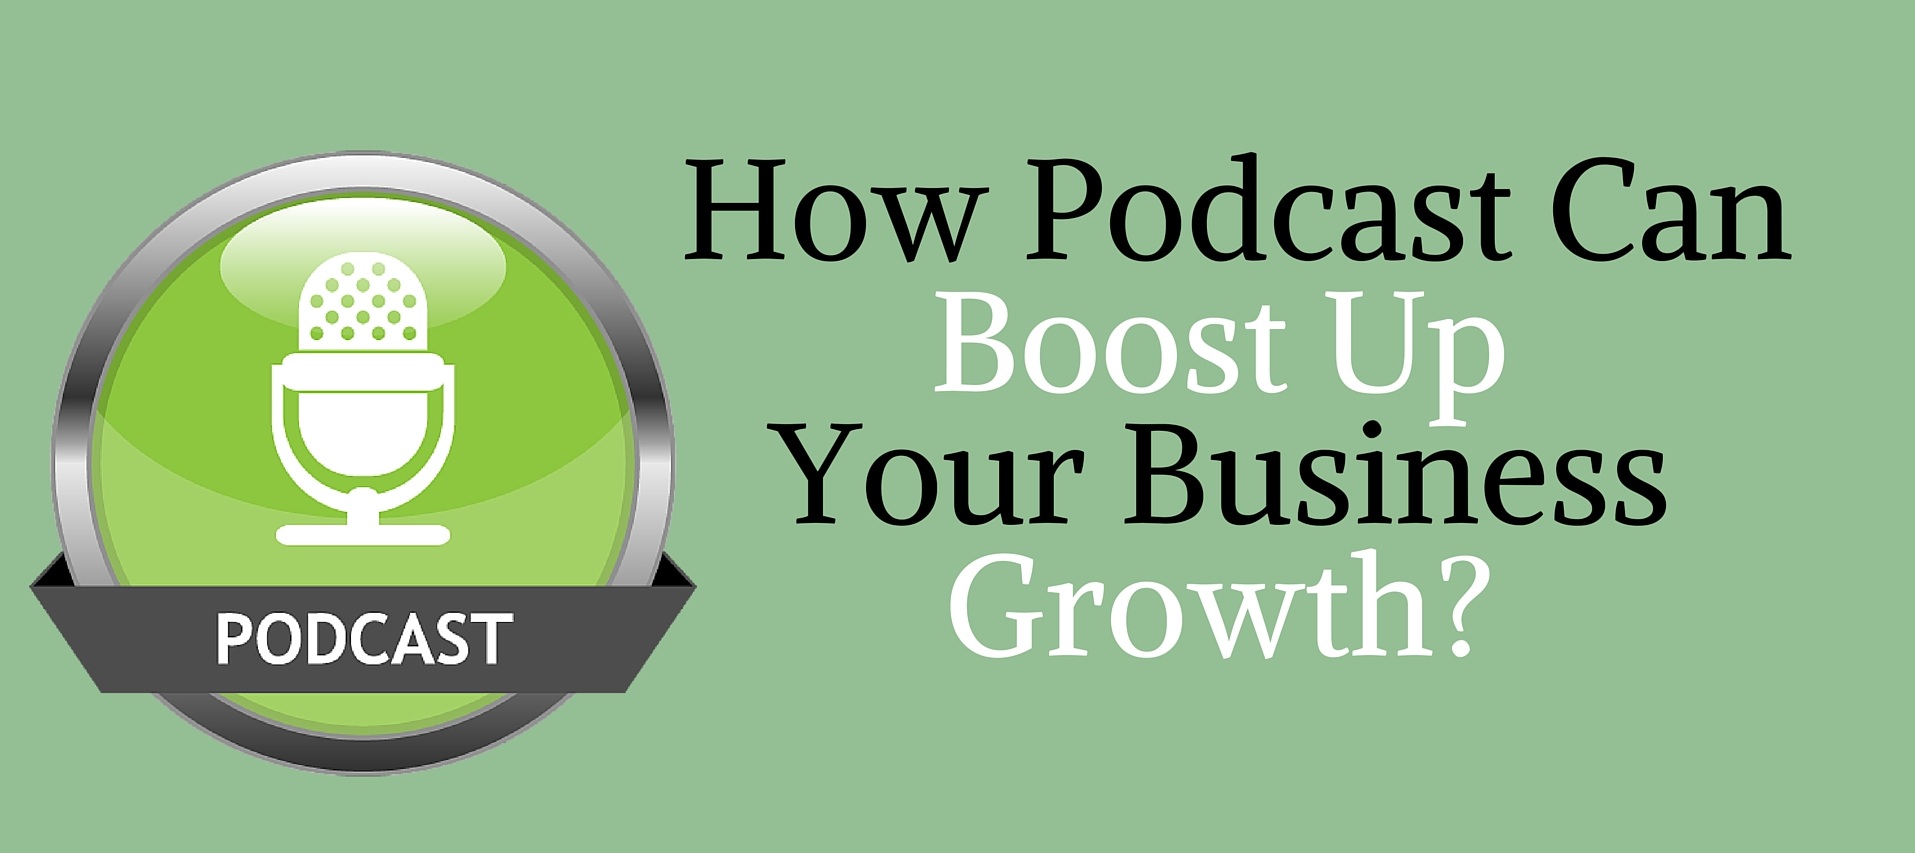 How Podcast Can Boost Up Your Business Growth